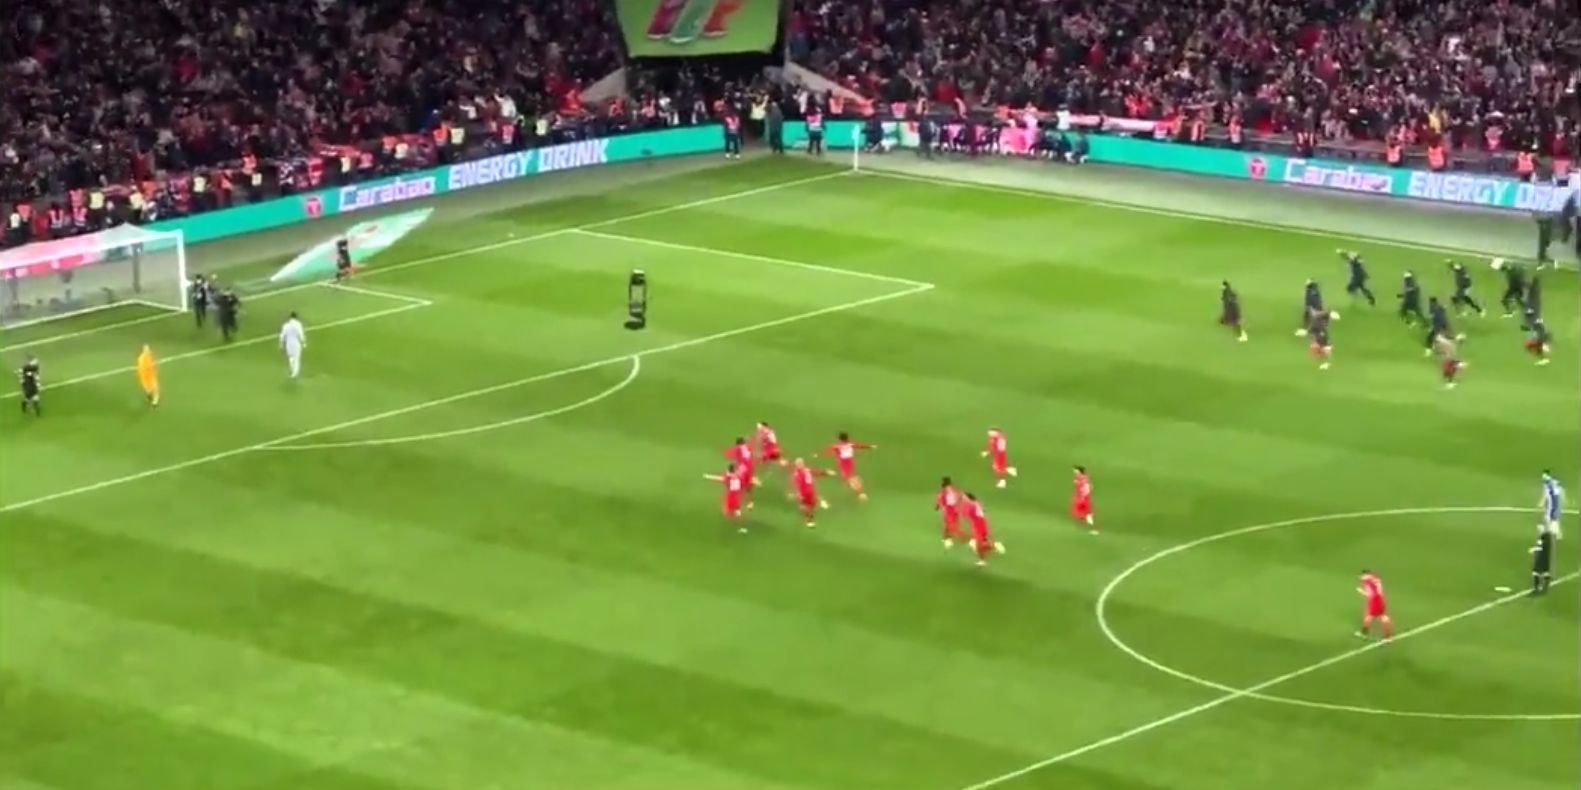 (Video) Kepa Arrizabalaga’s penalty miss and Liverpool’s celebrations captured from the Chelsea end at Wembley